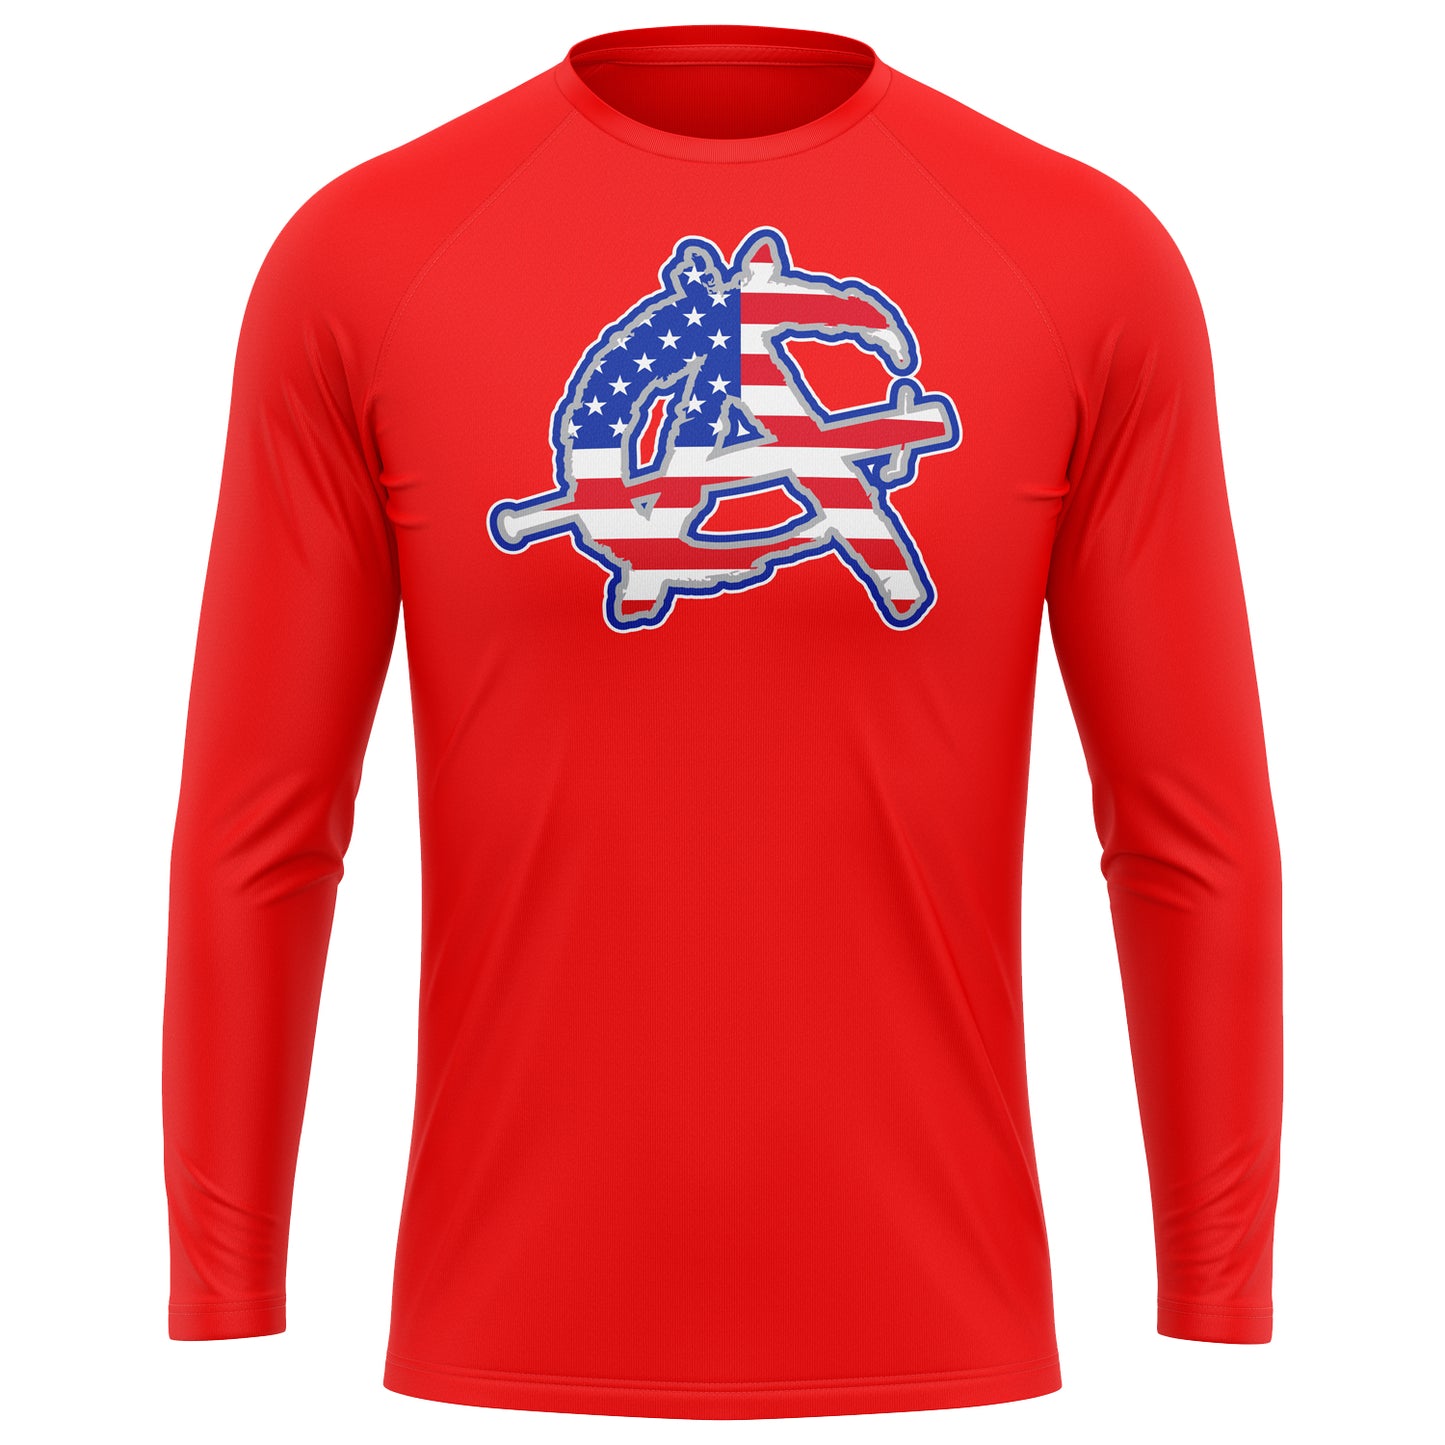 Anarchy Performance Long Sleeve Crew Neck Tee - Red/USA